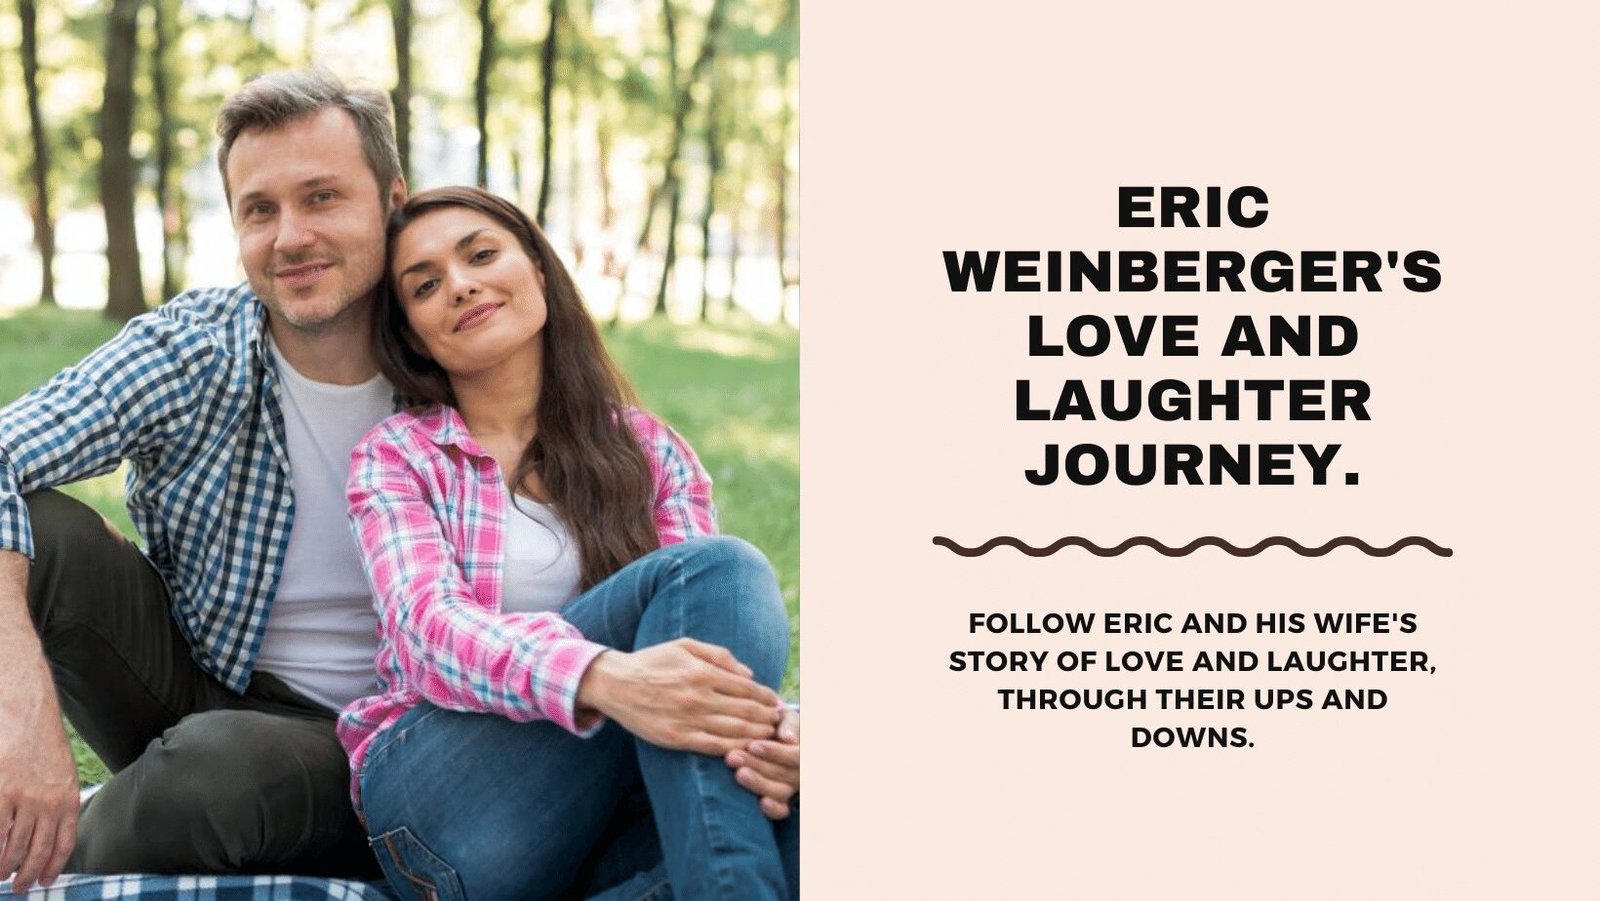 In Love and Laughter Eric Weinberger and His Wife’s Journey